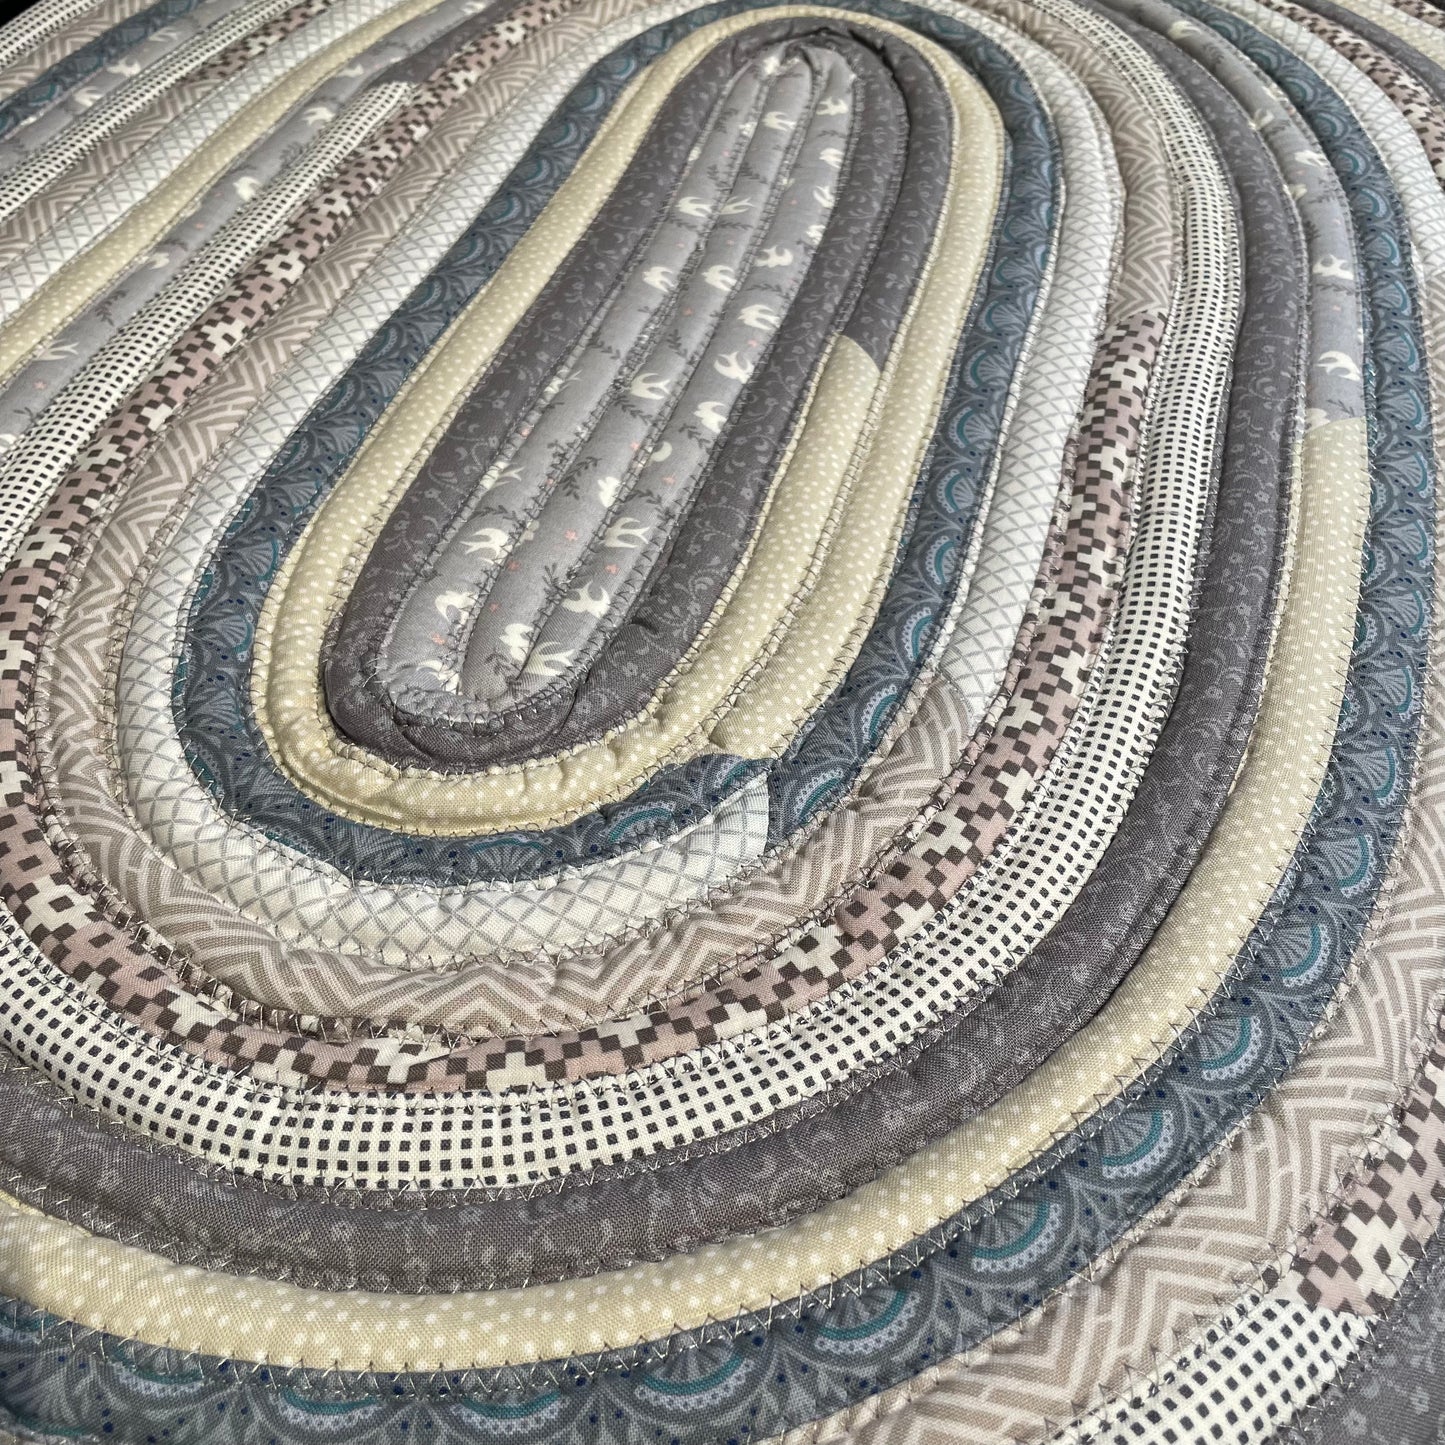 Grey Tones Kitchen Accent JellyRoll Rug